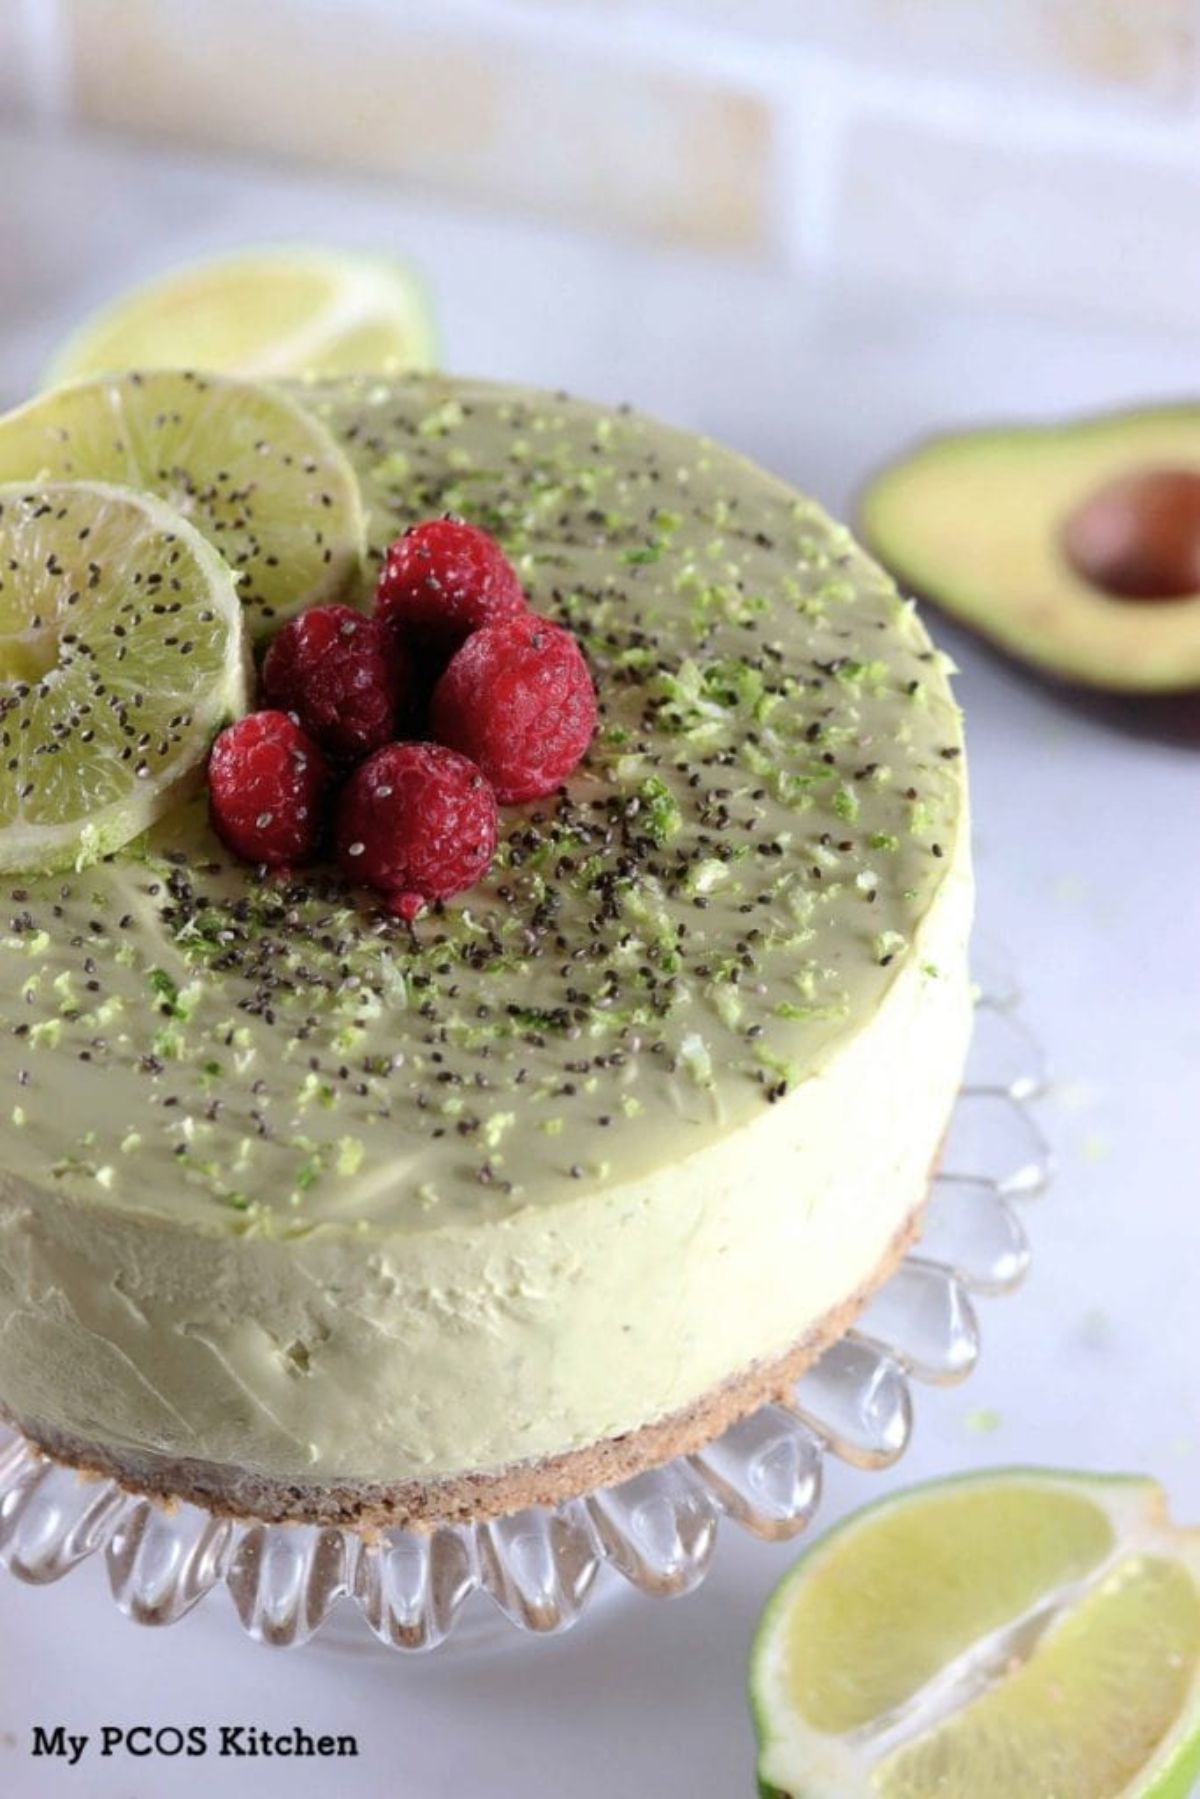 On a glass, fluted ckae stand is a light green cheesecake topped with lime zest, raspberries and lime slices. LIme wedges and an avocado half are off to the side